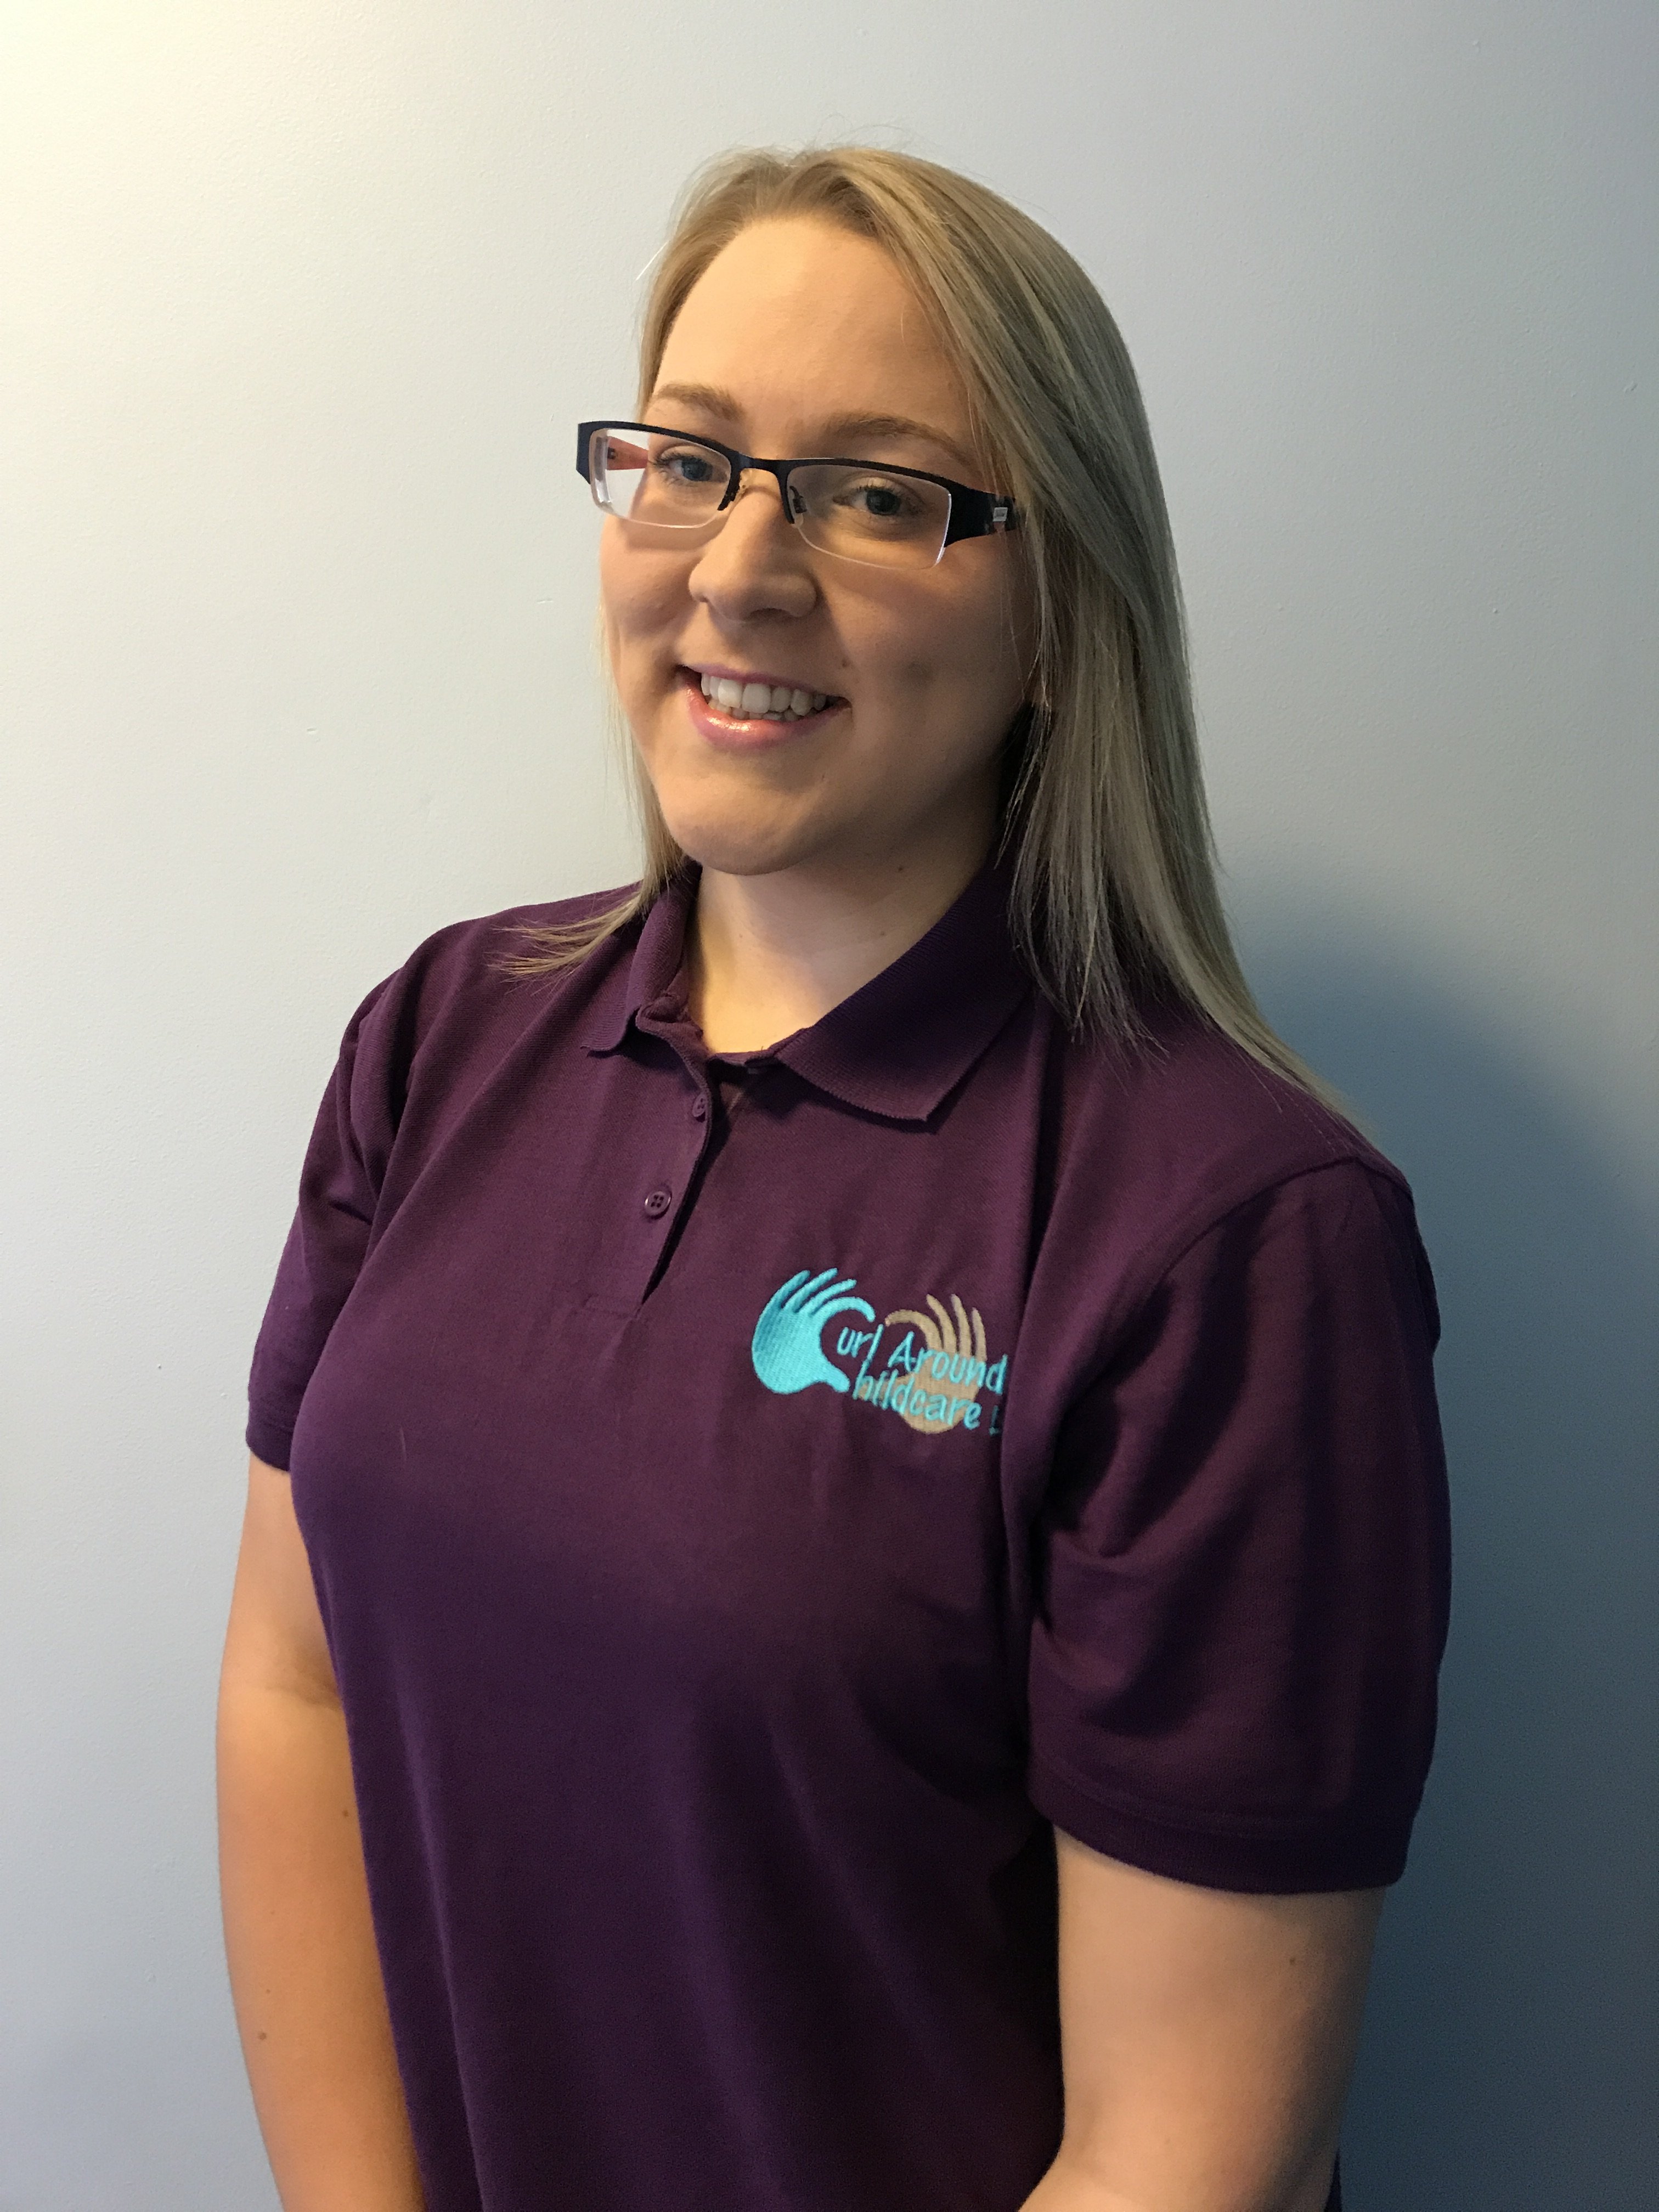 Meet the Team at Beaconsfield Childcare – Leanne